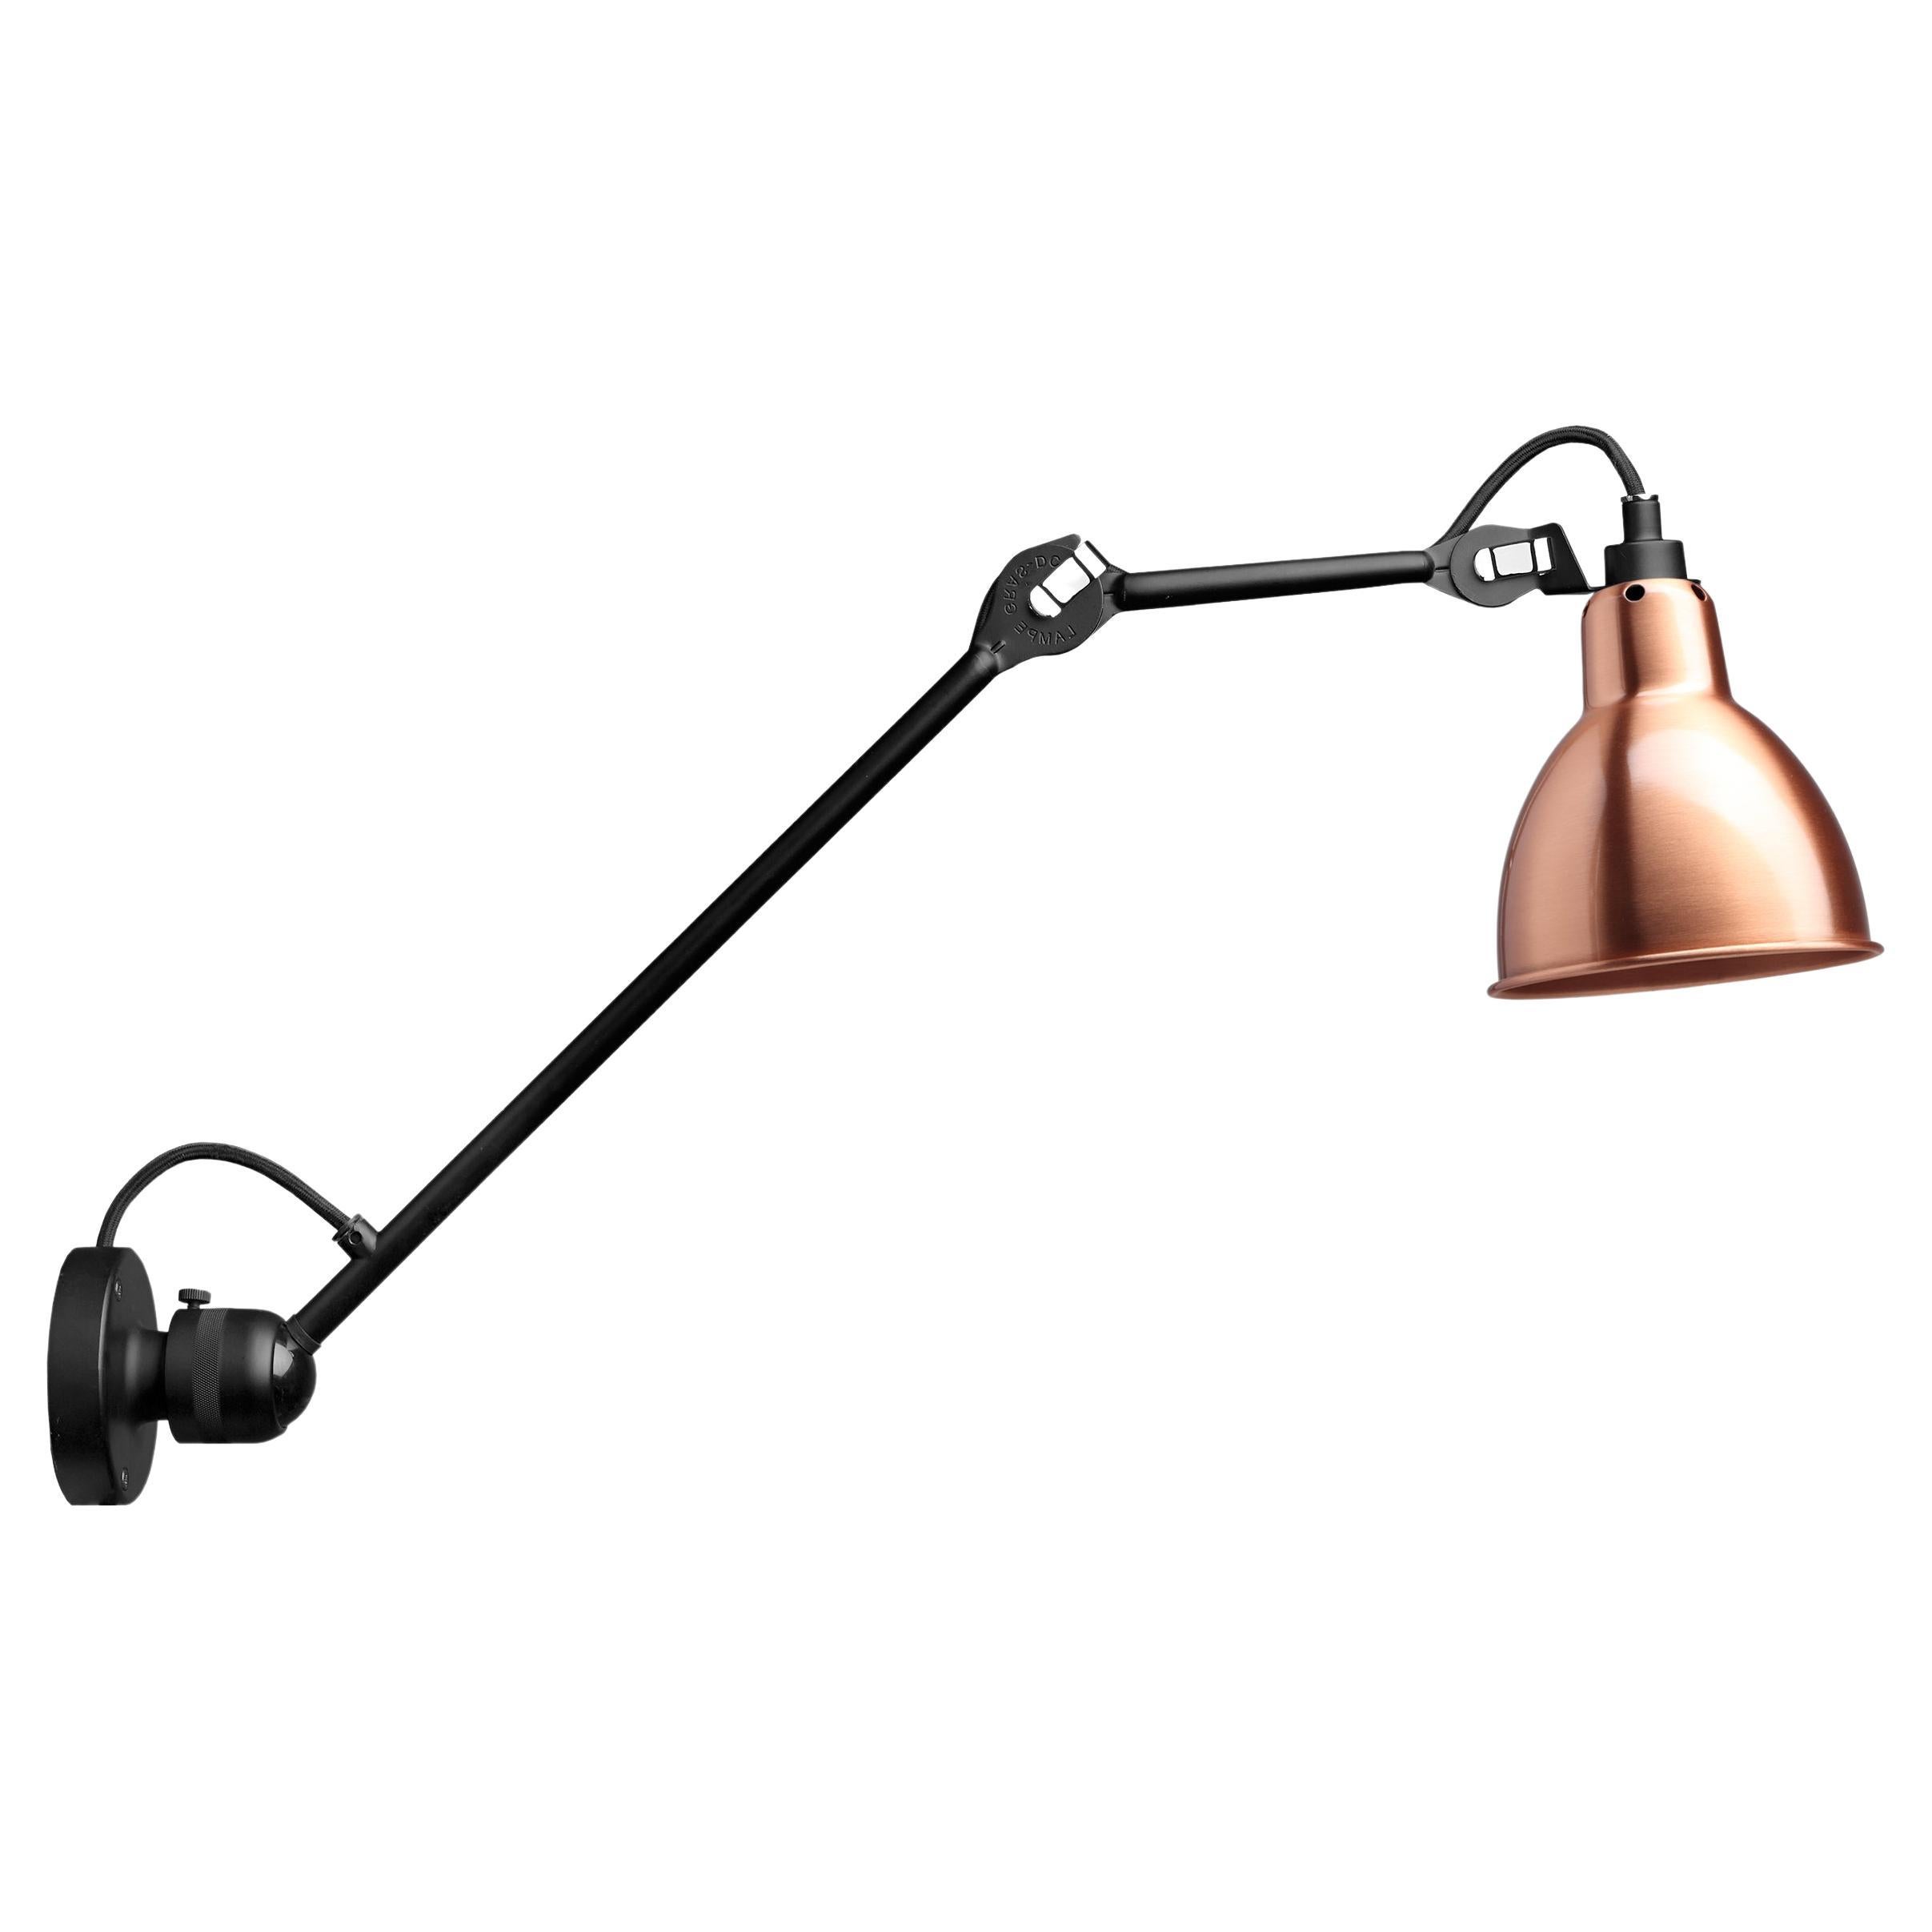 DCW Editions La Lampe Gras N°304 L40 Wall Lamp in Black Arm and Copper Shade